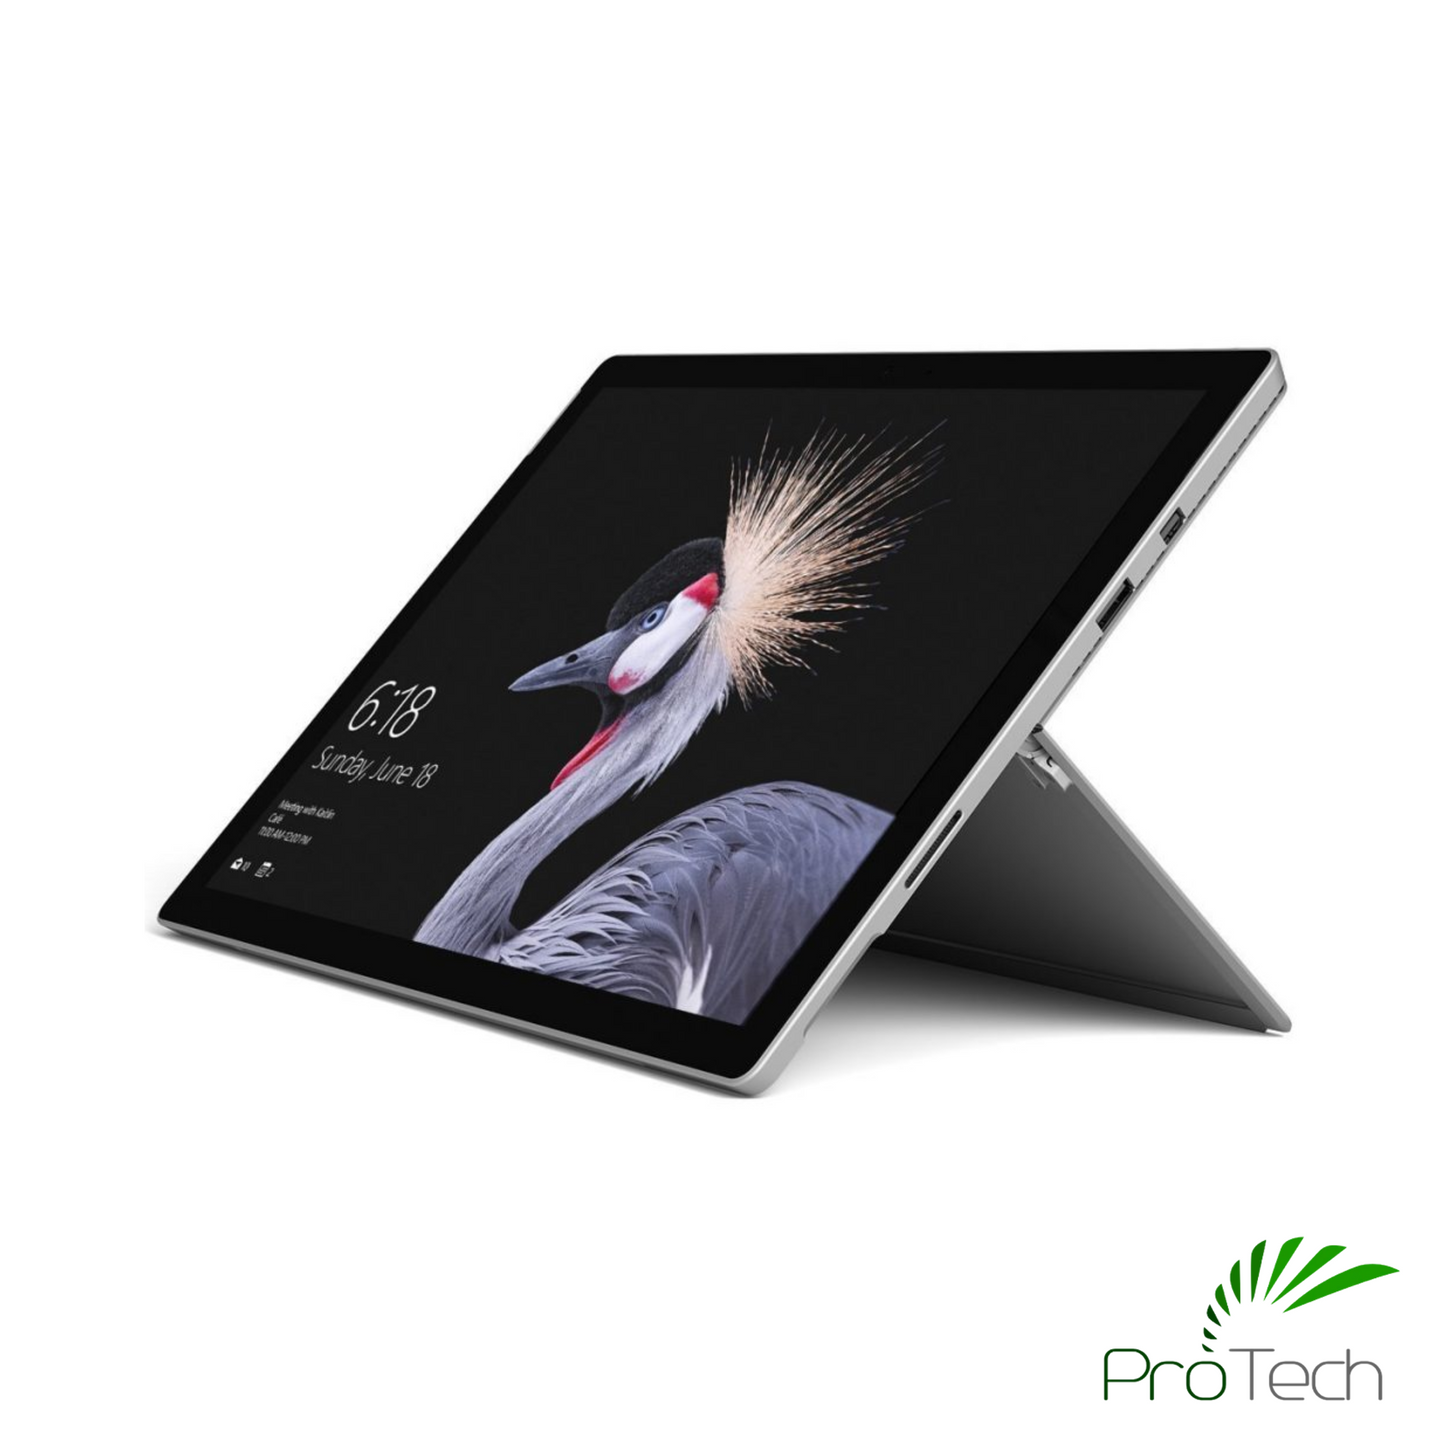 Microsoft Surface Pro 3 | Core i5 | 4GB RAM | 128GB SSD ProTech I.T. Solutions